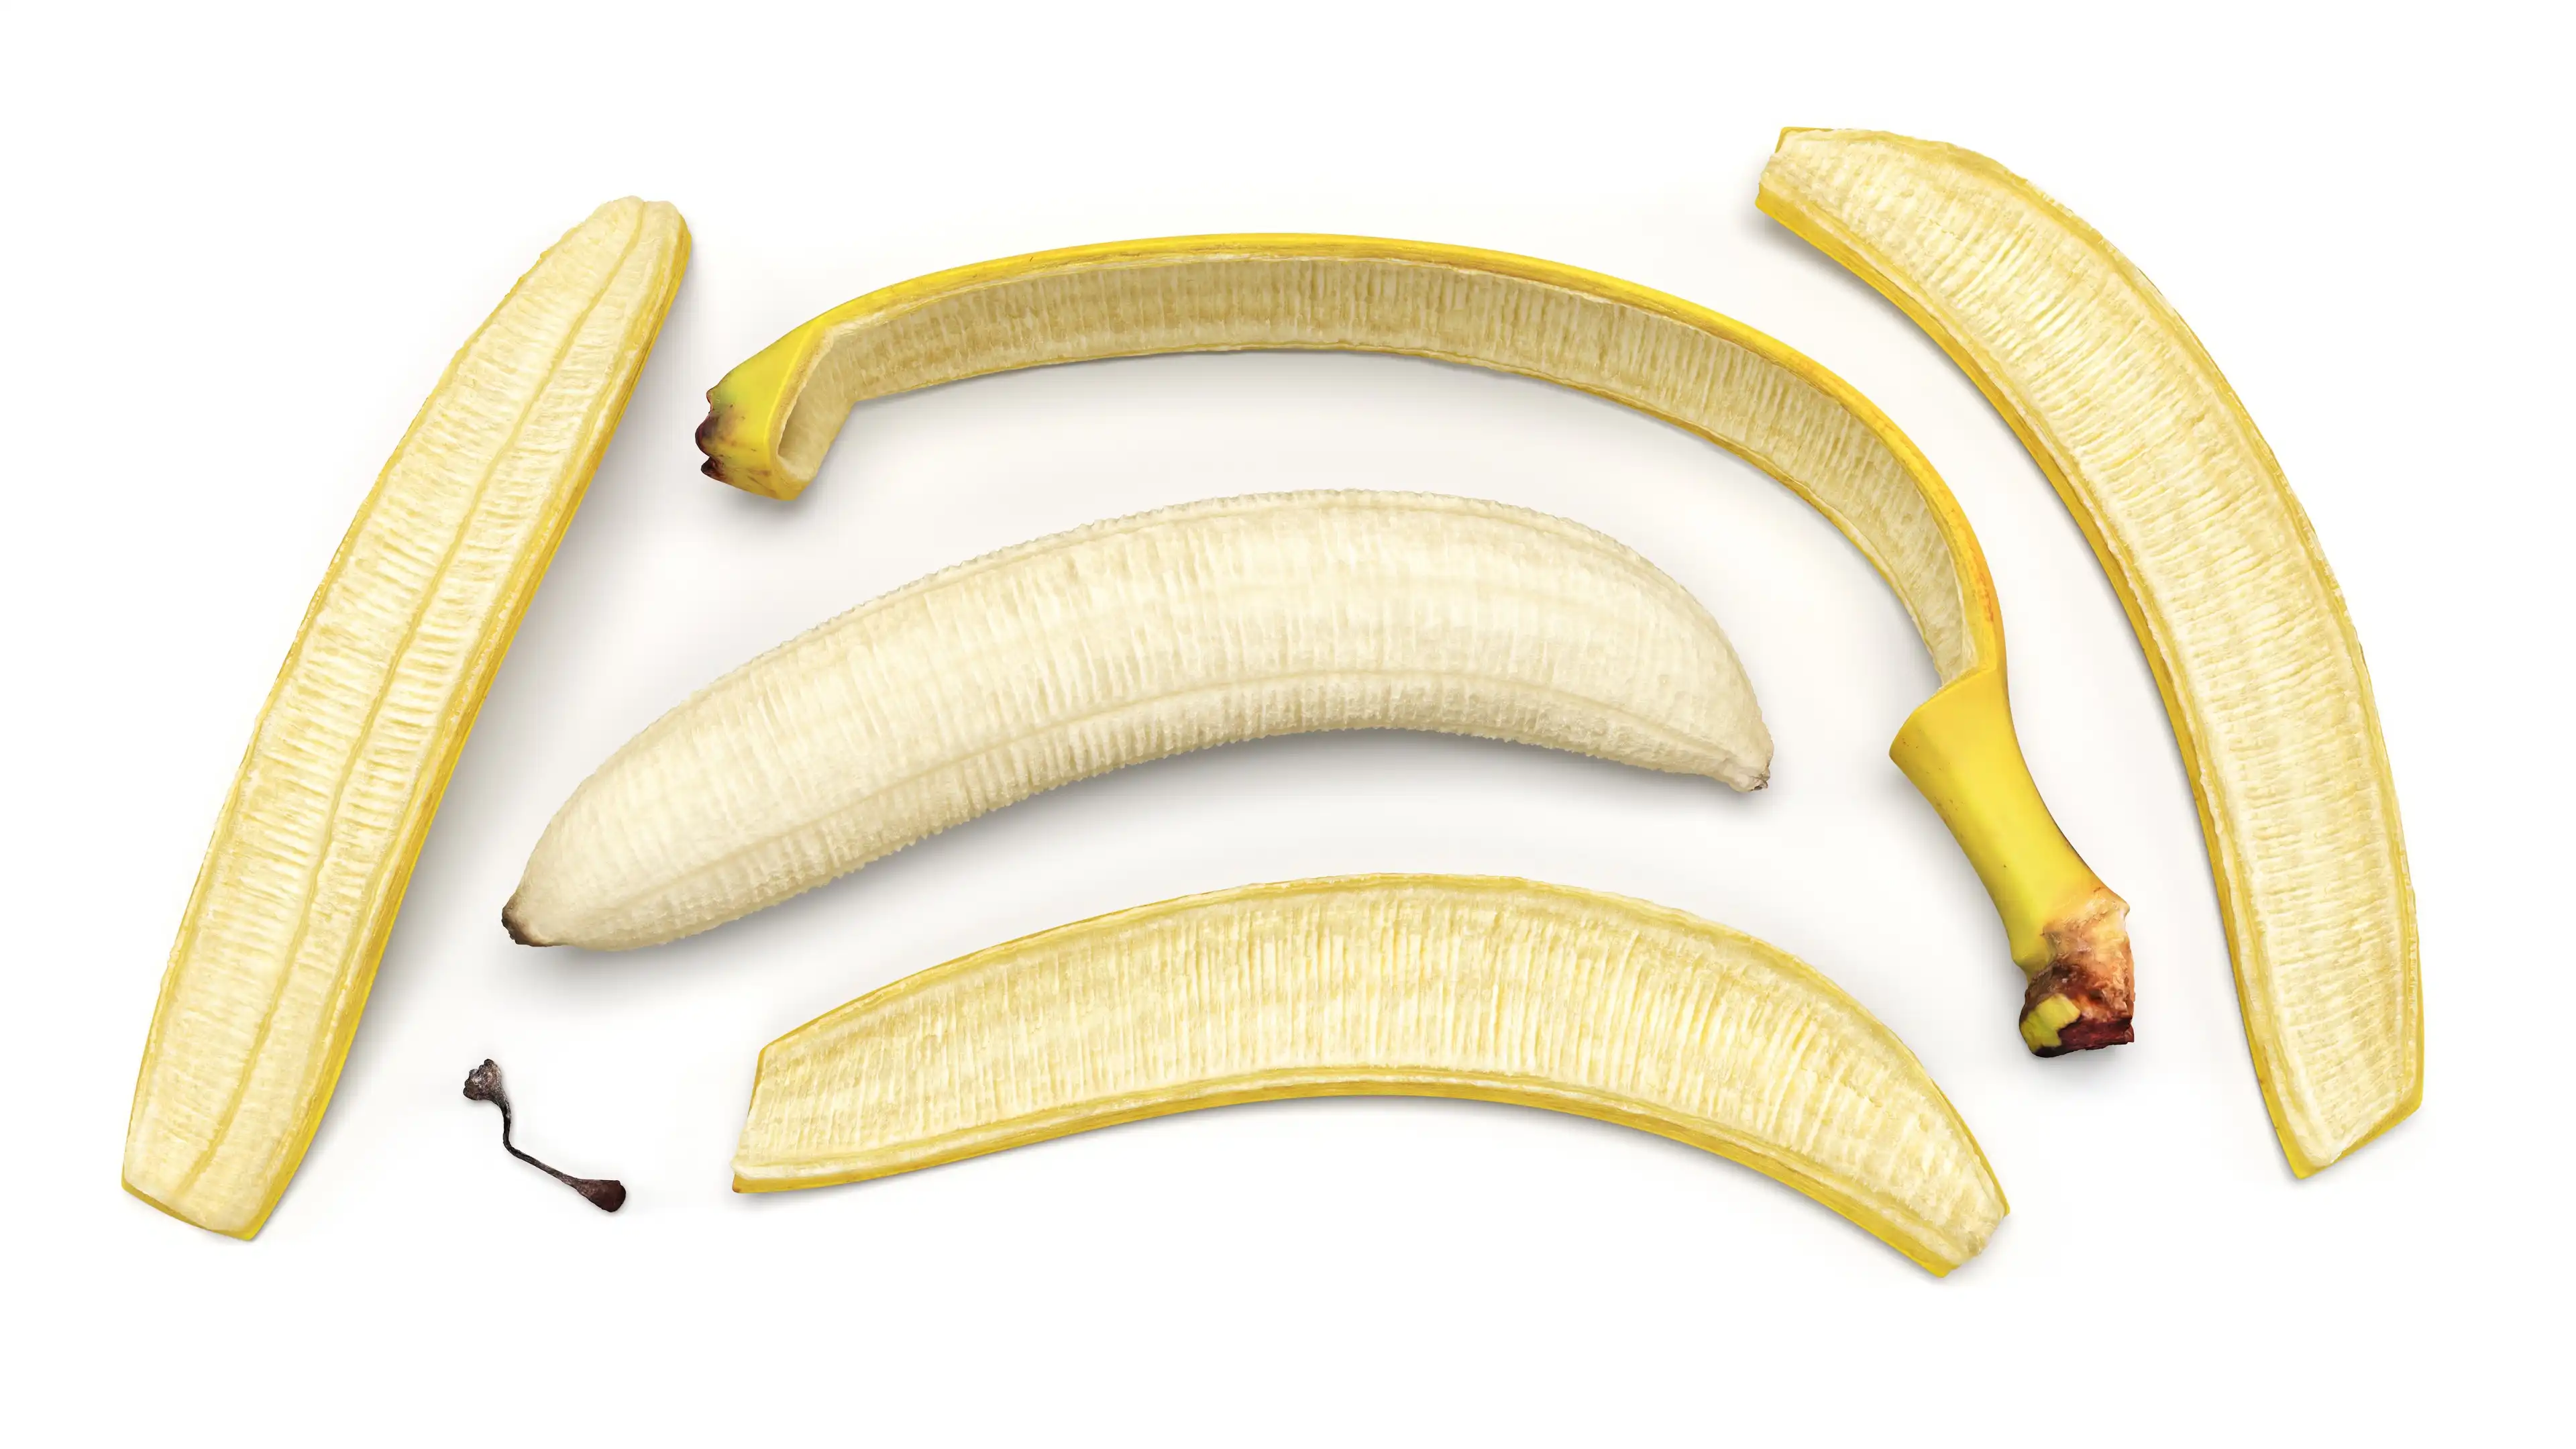 banana 3d model disassembled to soft banana inside, four peel sections and one banana flower